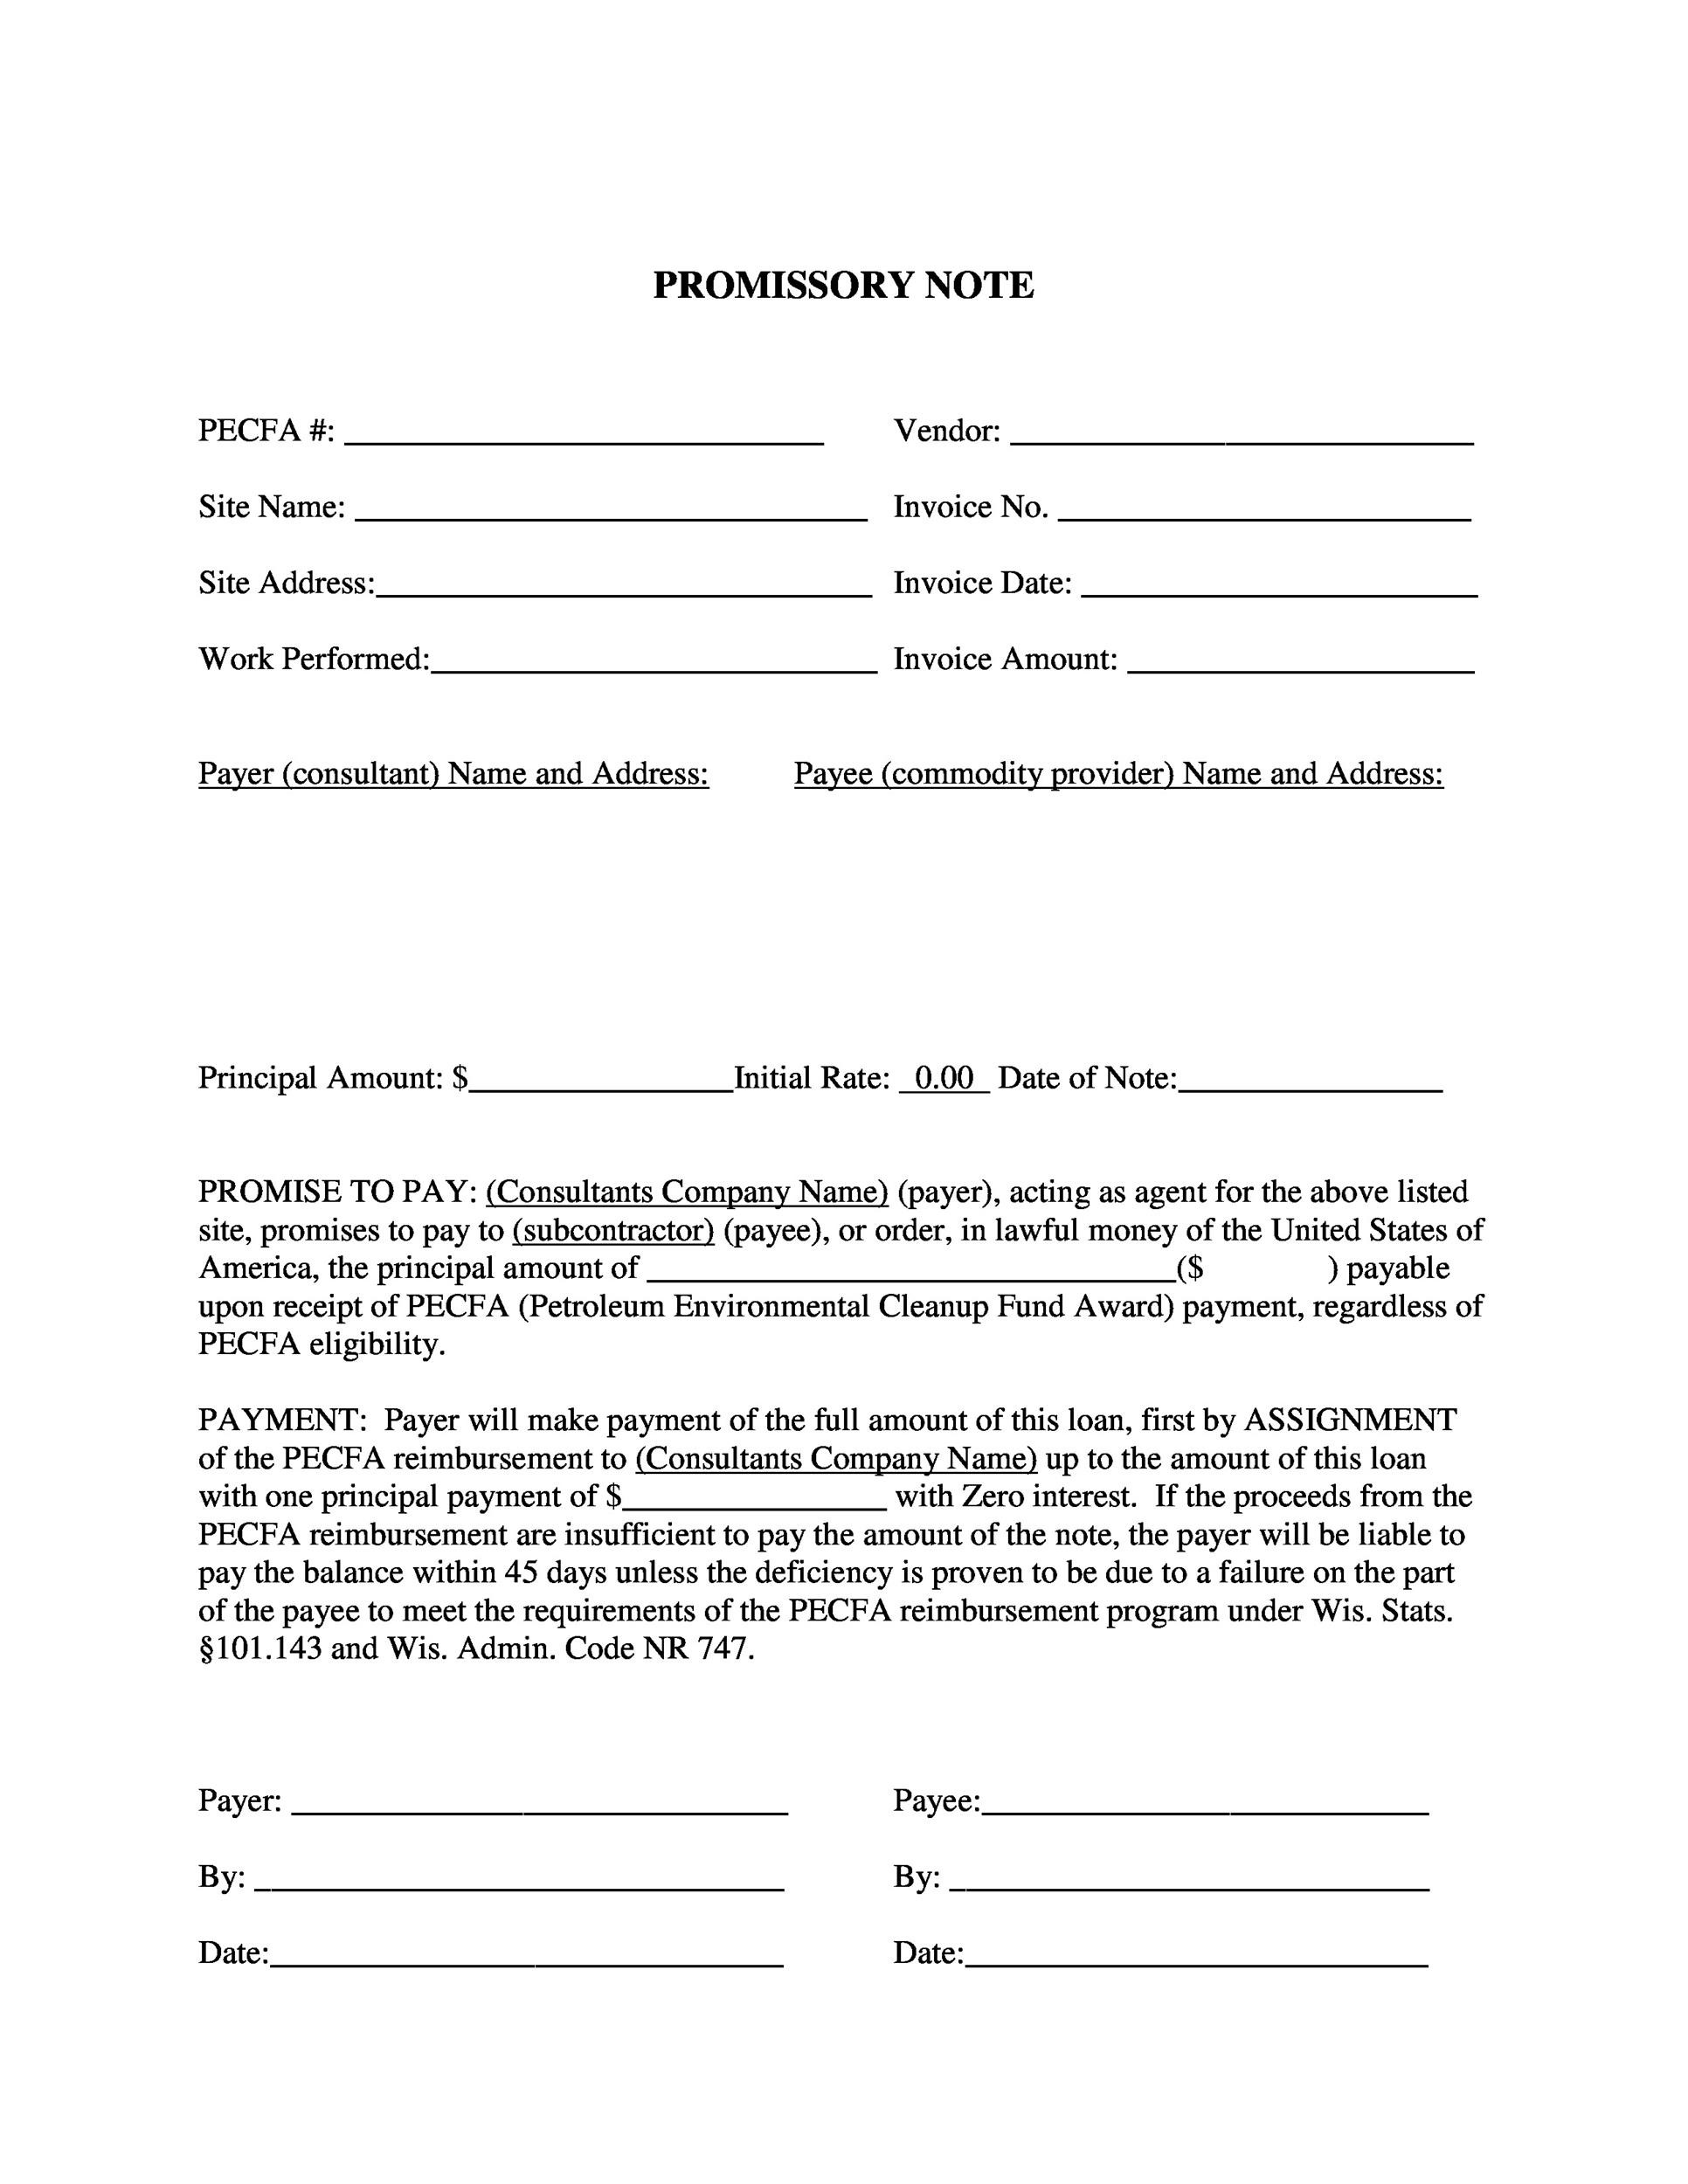 promissory-note-template-word